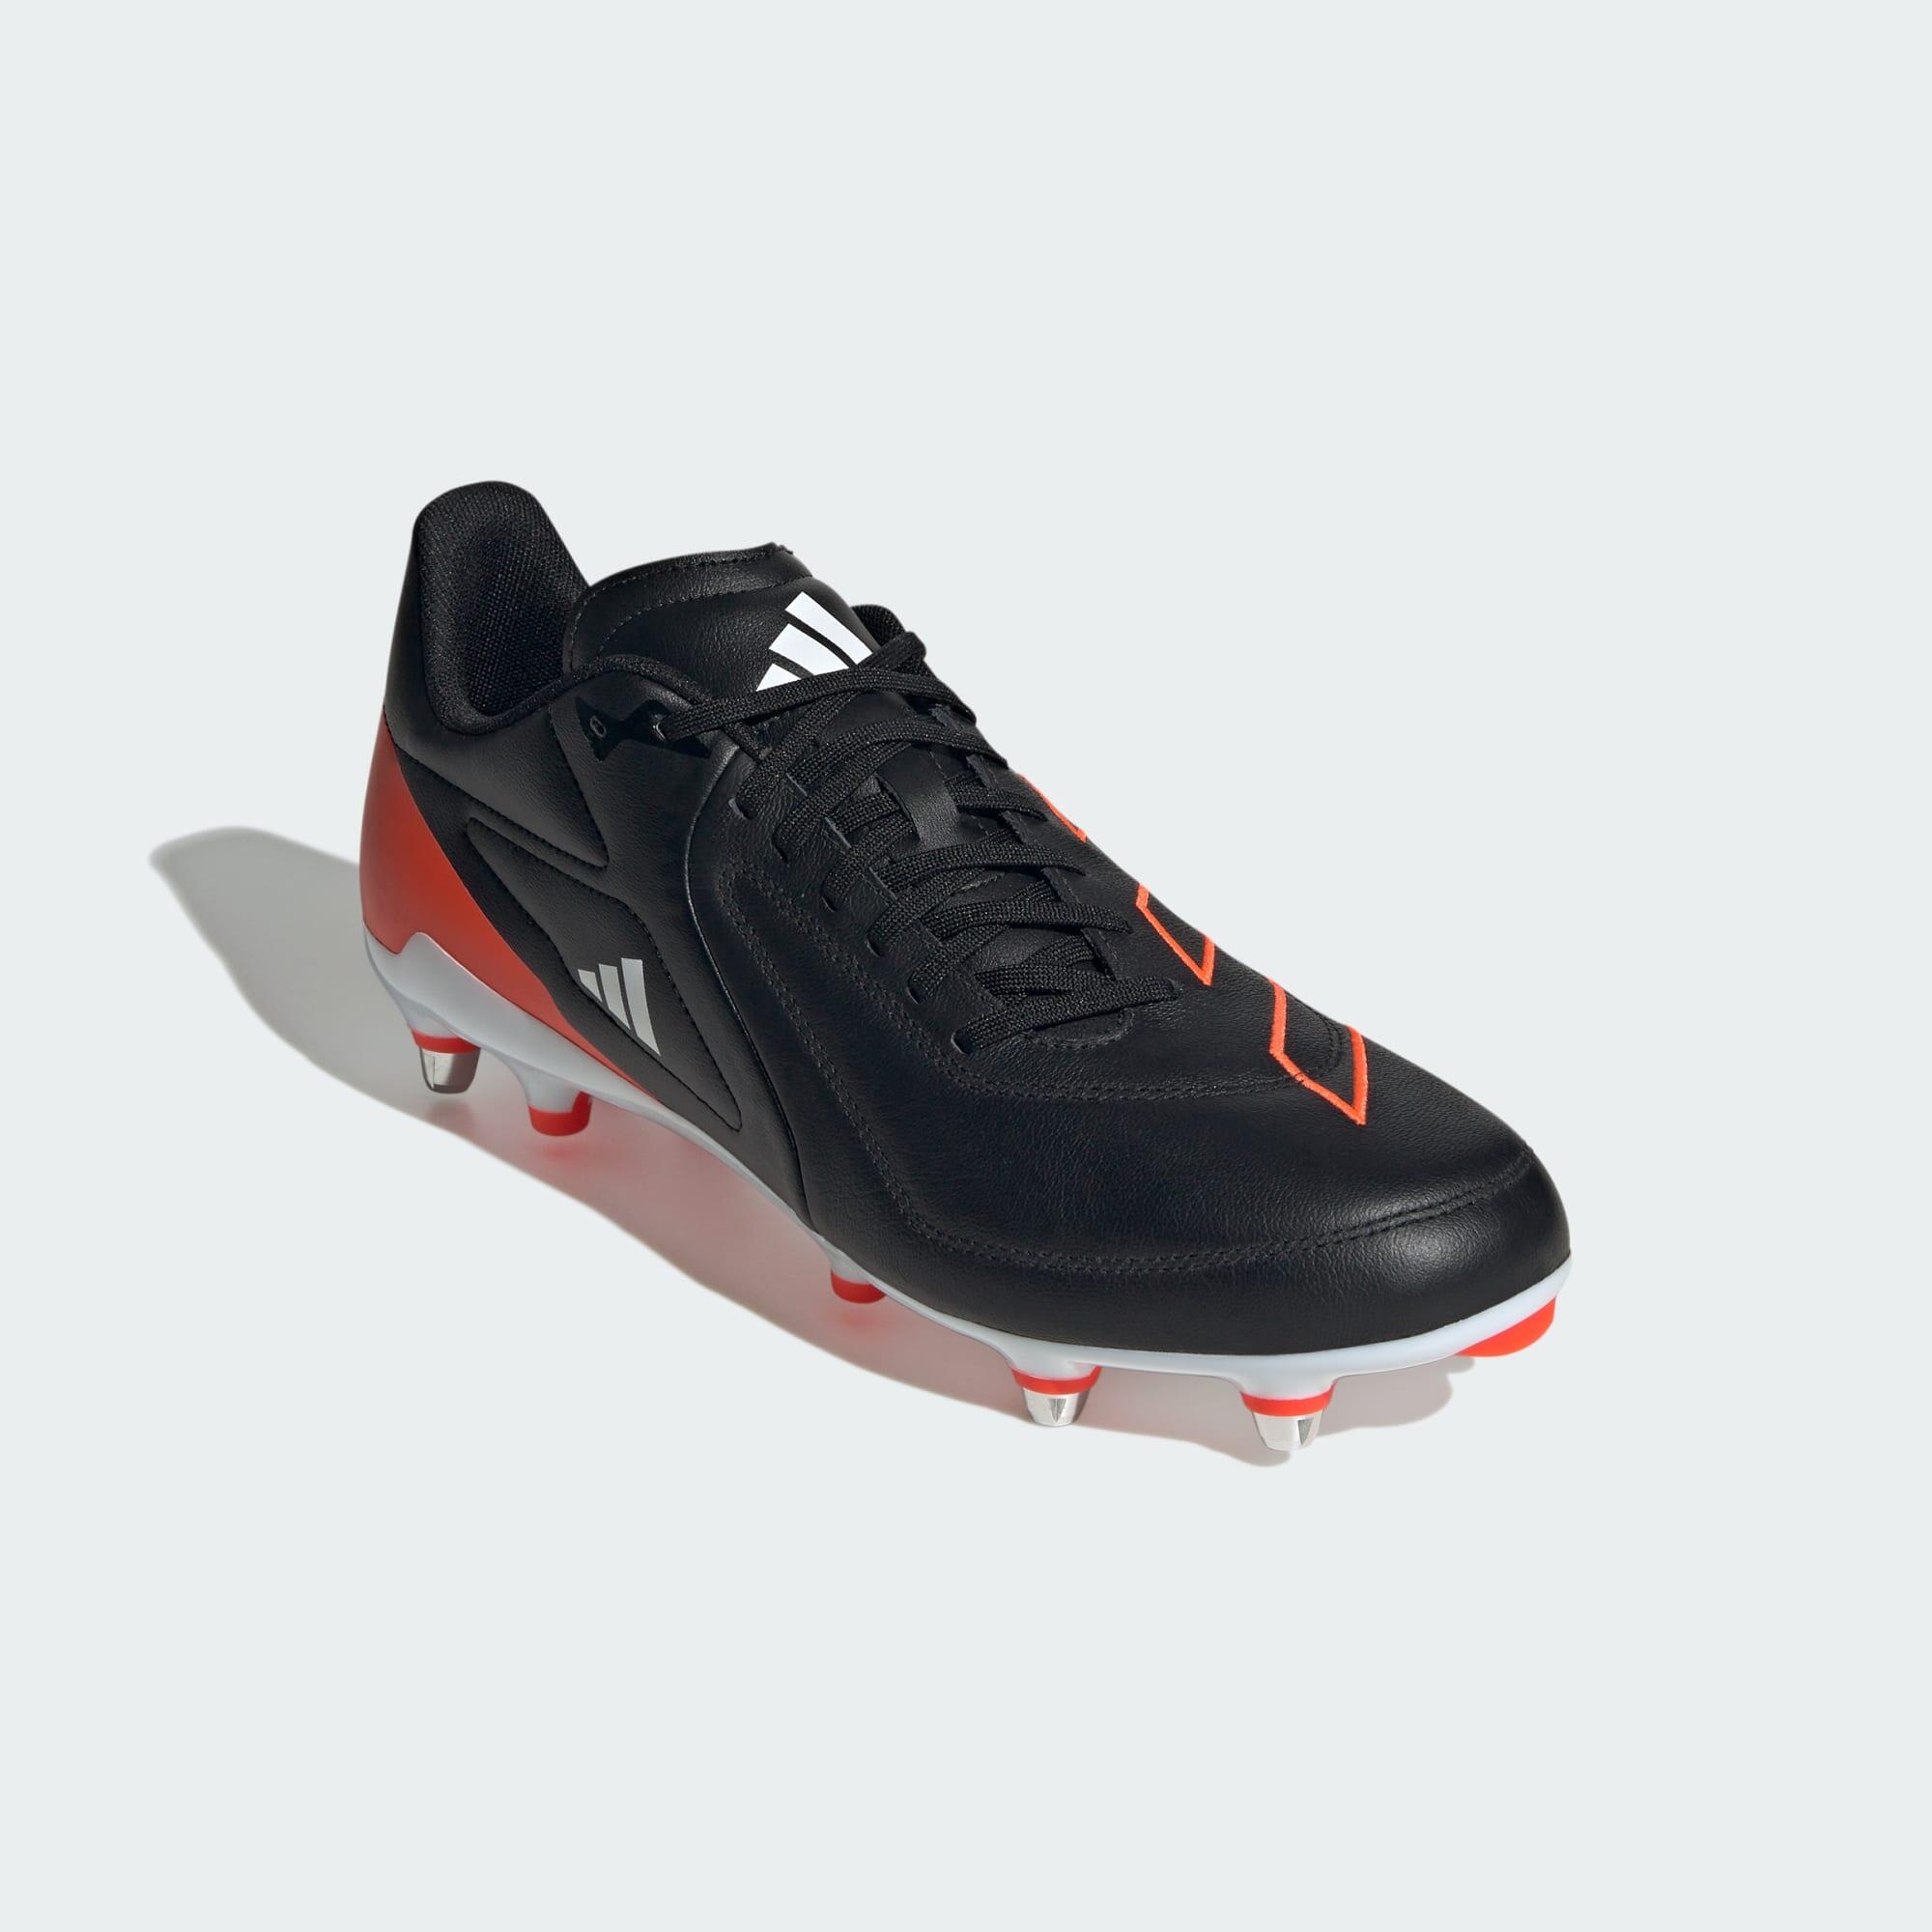 RS15 Elite Soft Ground Rugby Boots 5/7